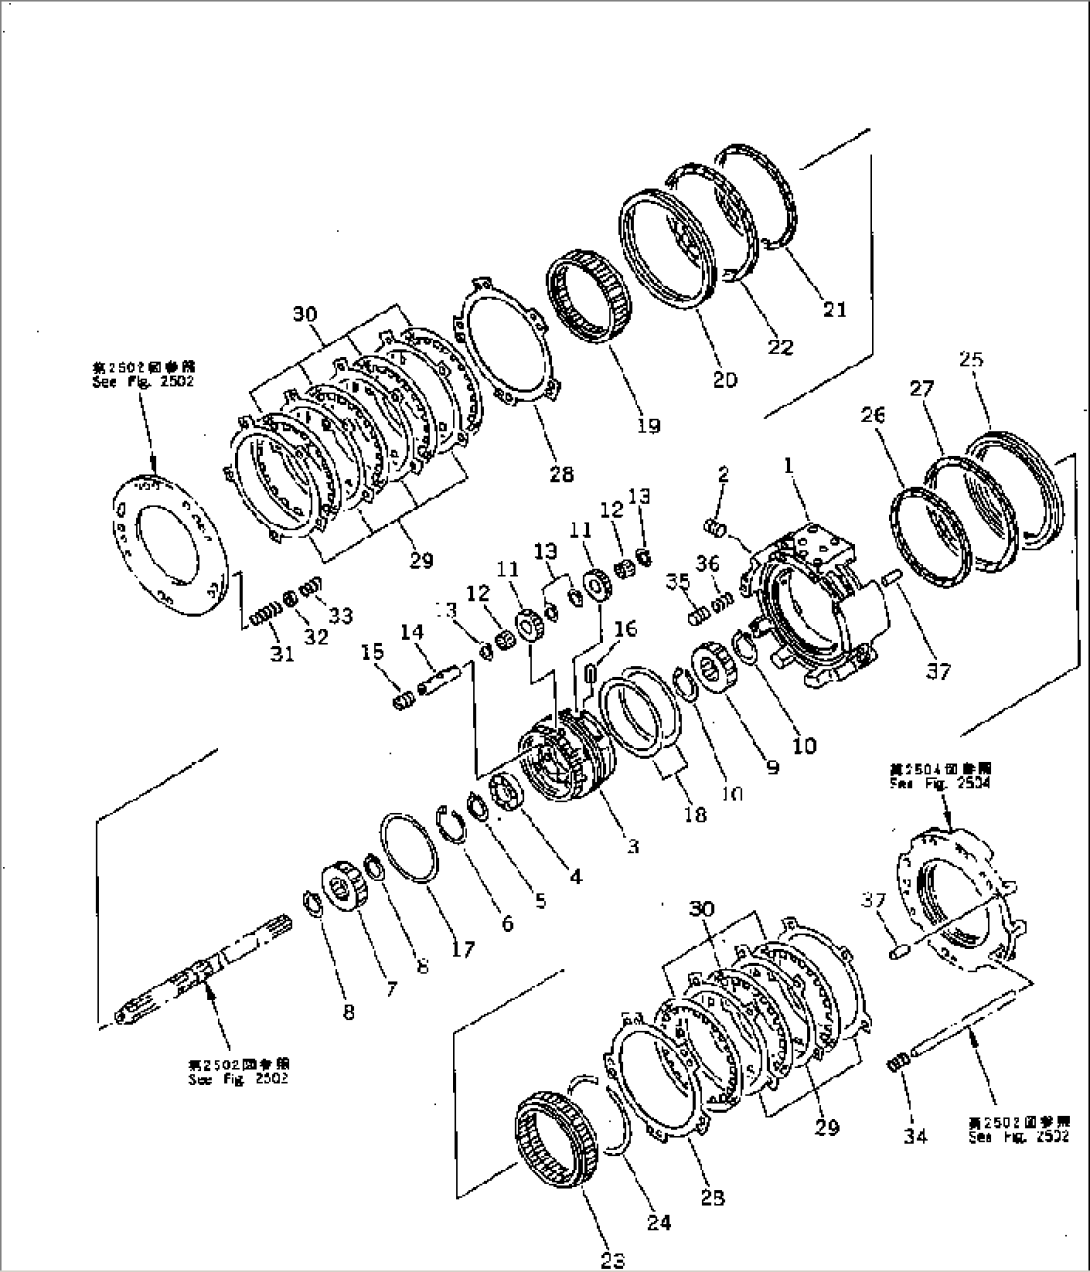 TRANSMISSION (FORWARD AND 3RD HOUSING) (3/7)